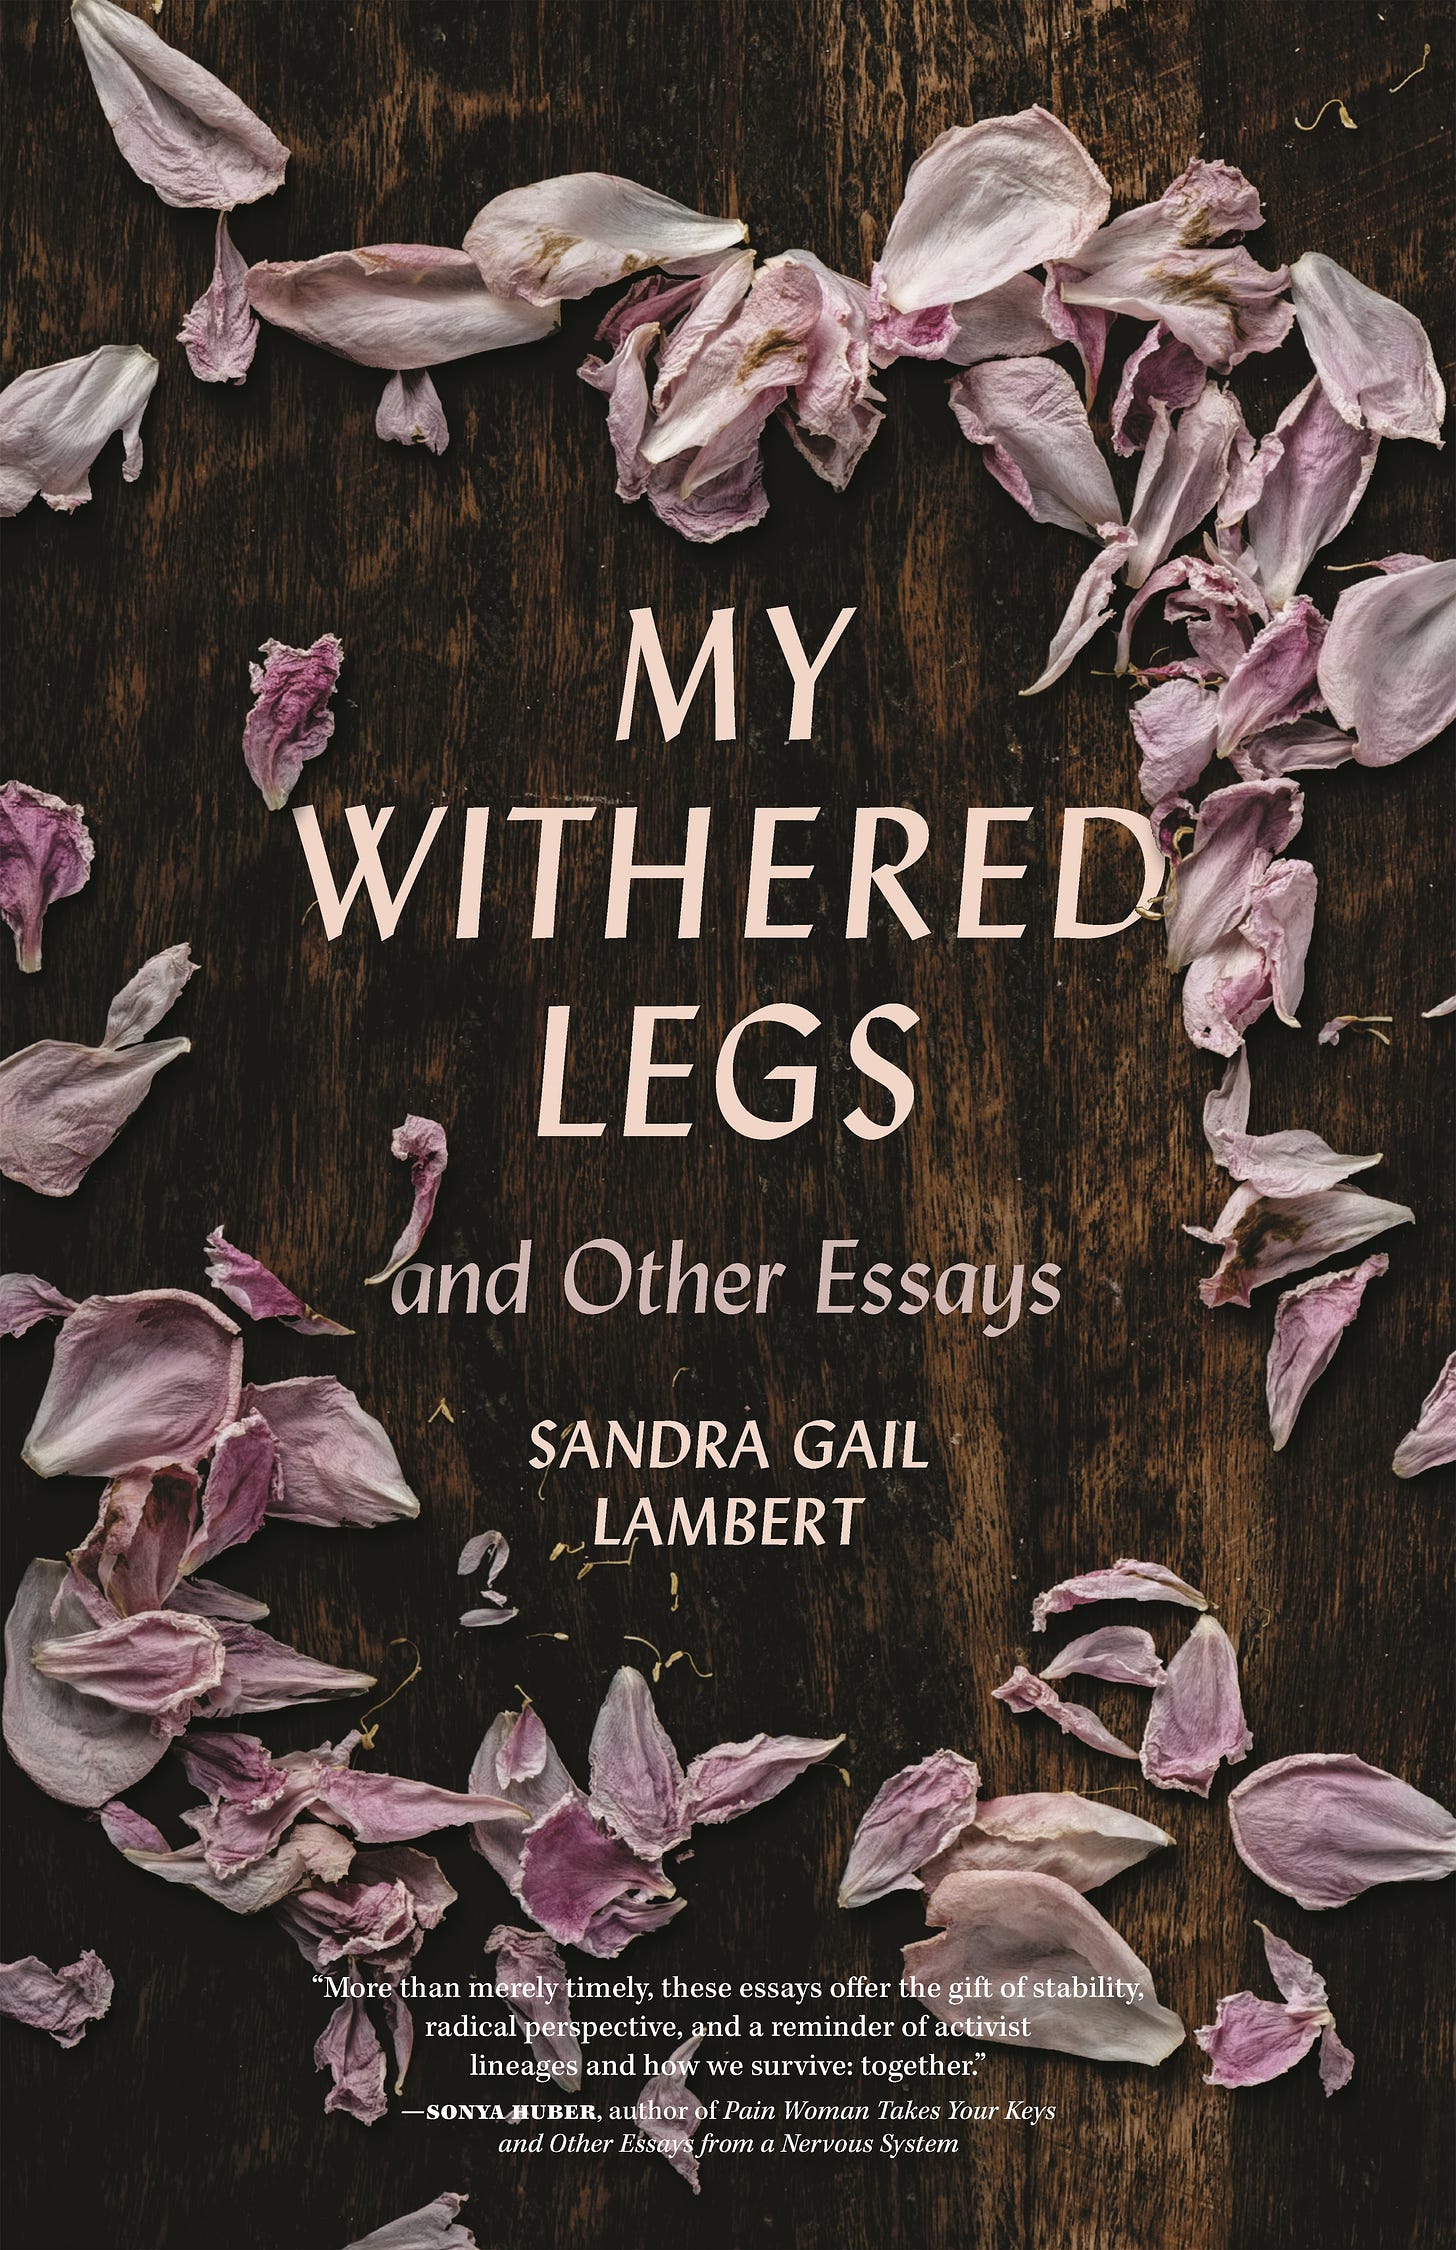 A book cover. The text says "My Withered Legs and Other Essays, Sandra Gail Lambert. There is a loose circle of purple petals around the text and a brown, tree bark like background. 